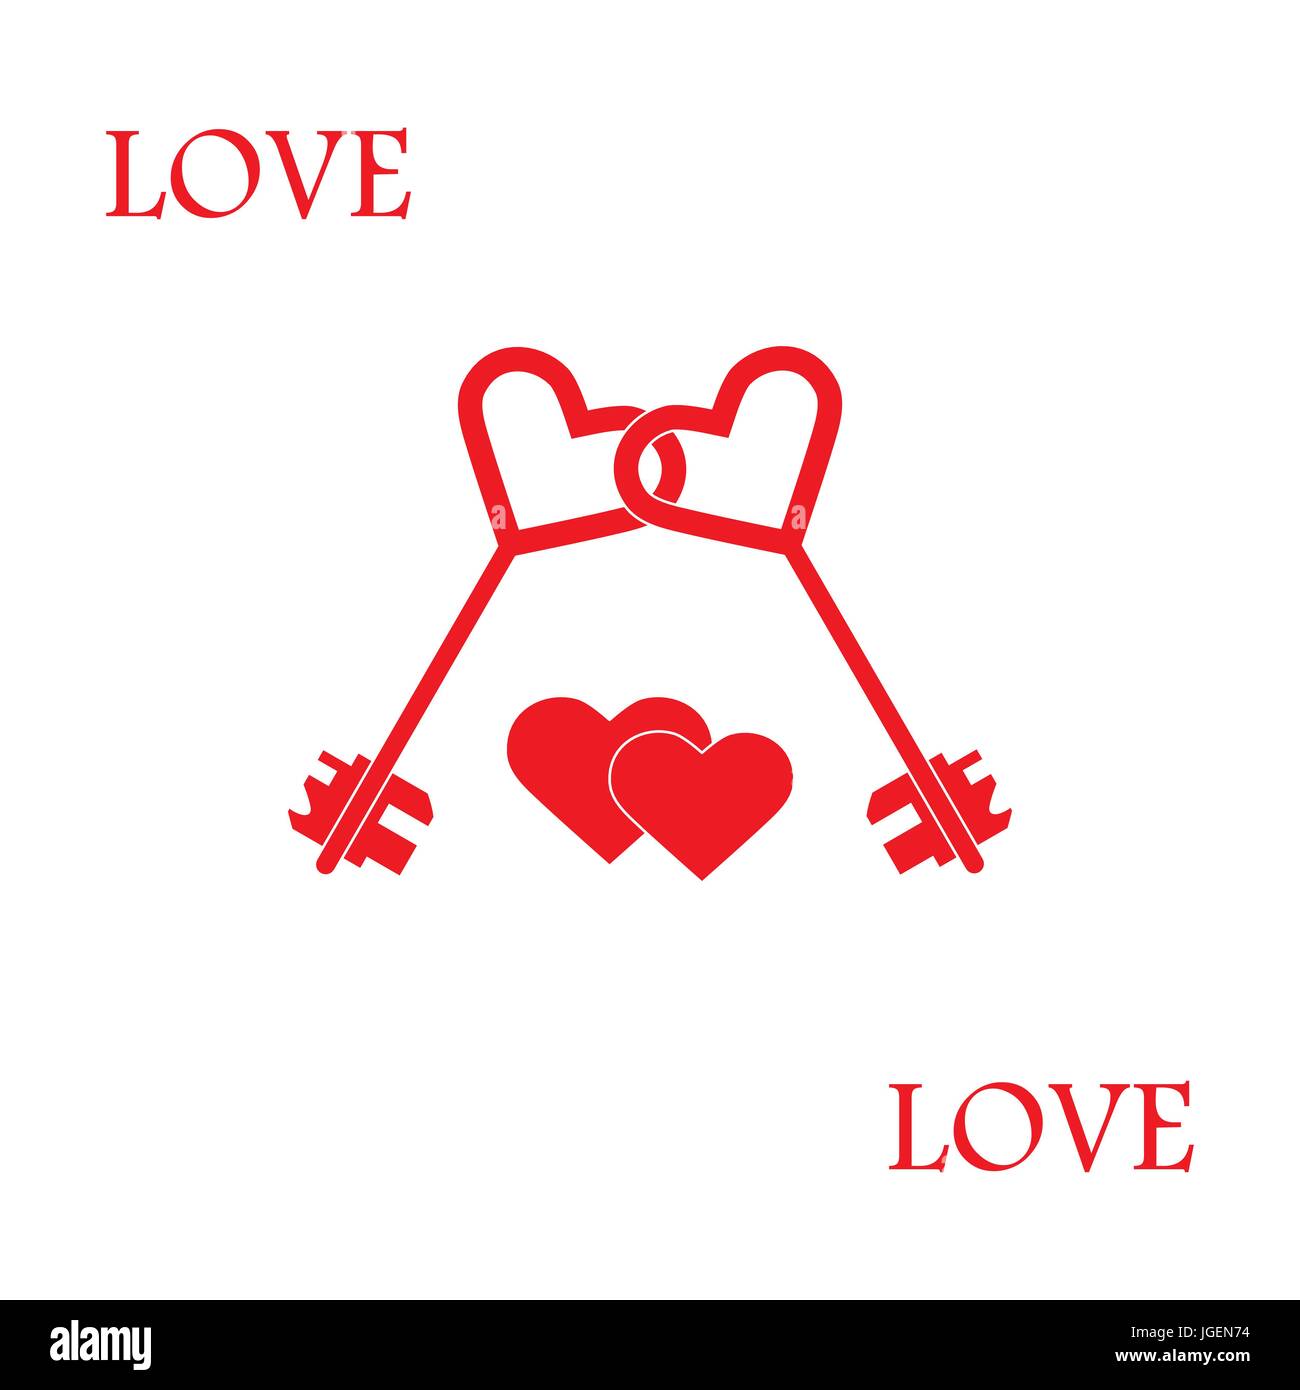 Cute vector illustration of love symbols: heart key icon and two ...